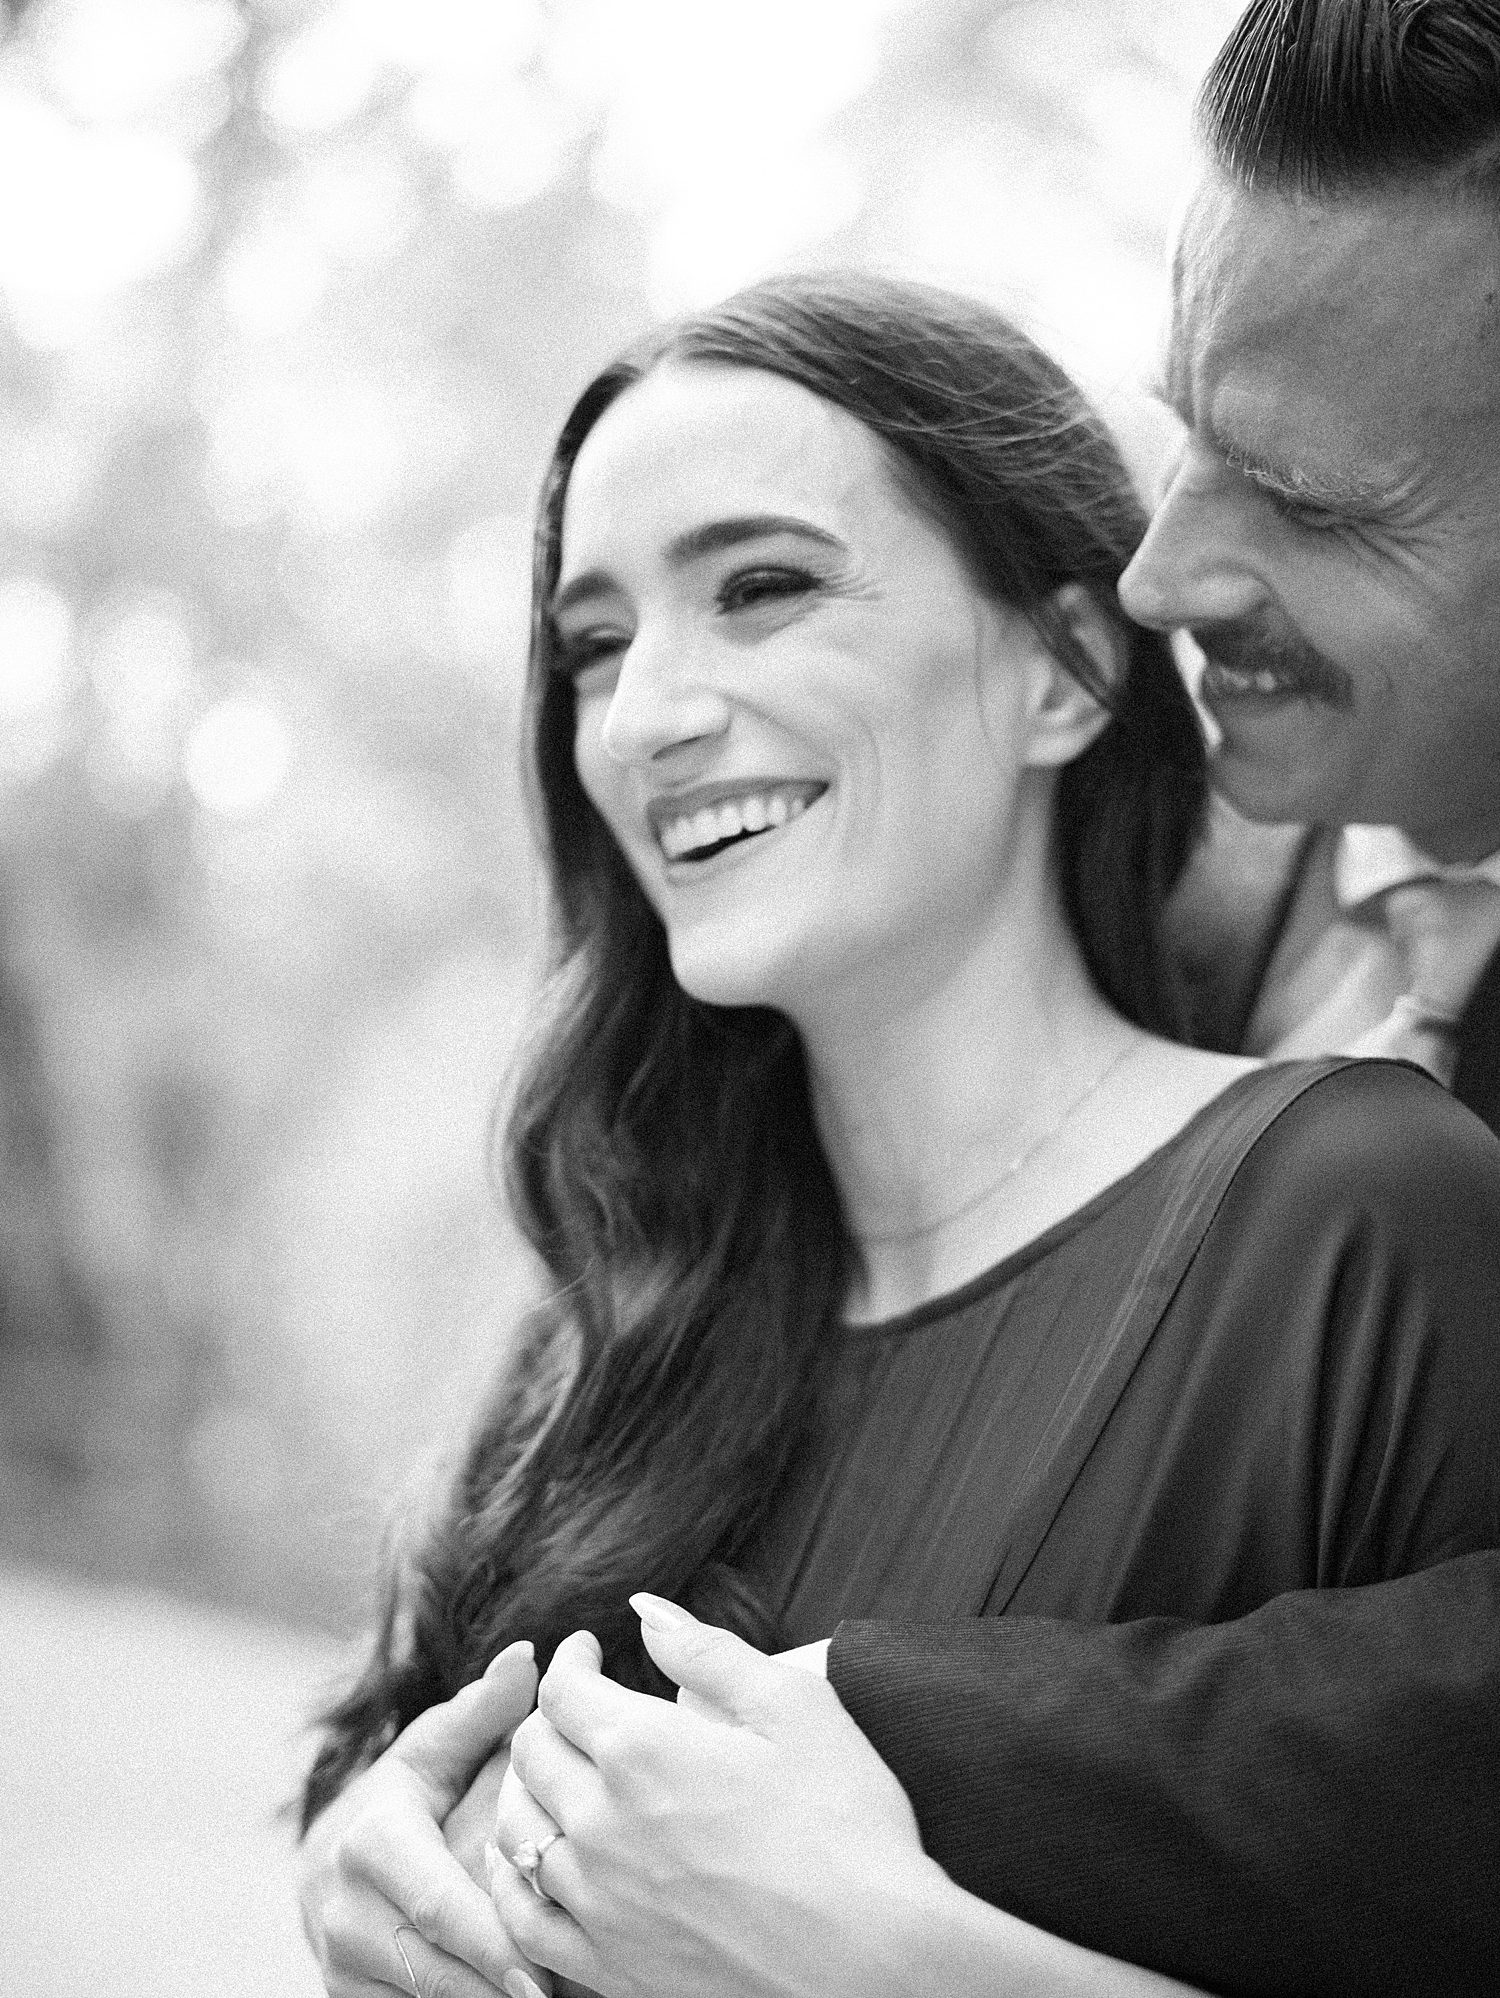 man hugs woman from behind making her smile during Tampa FL engagement photos 